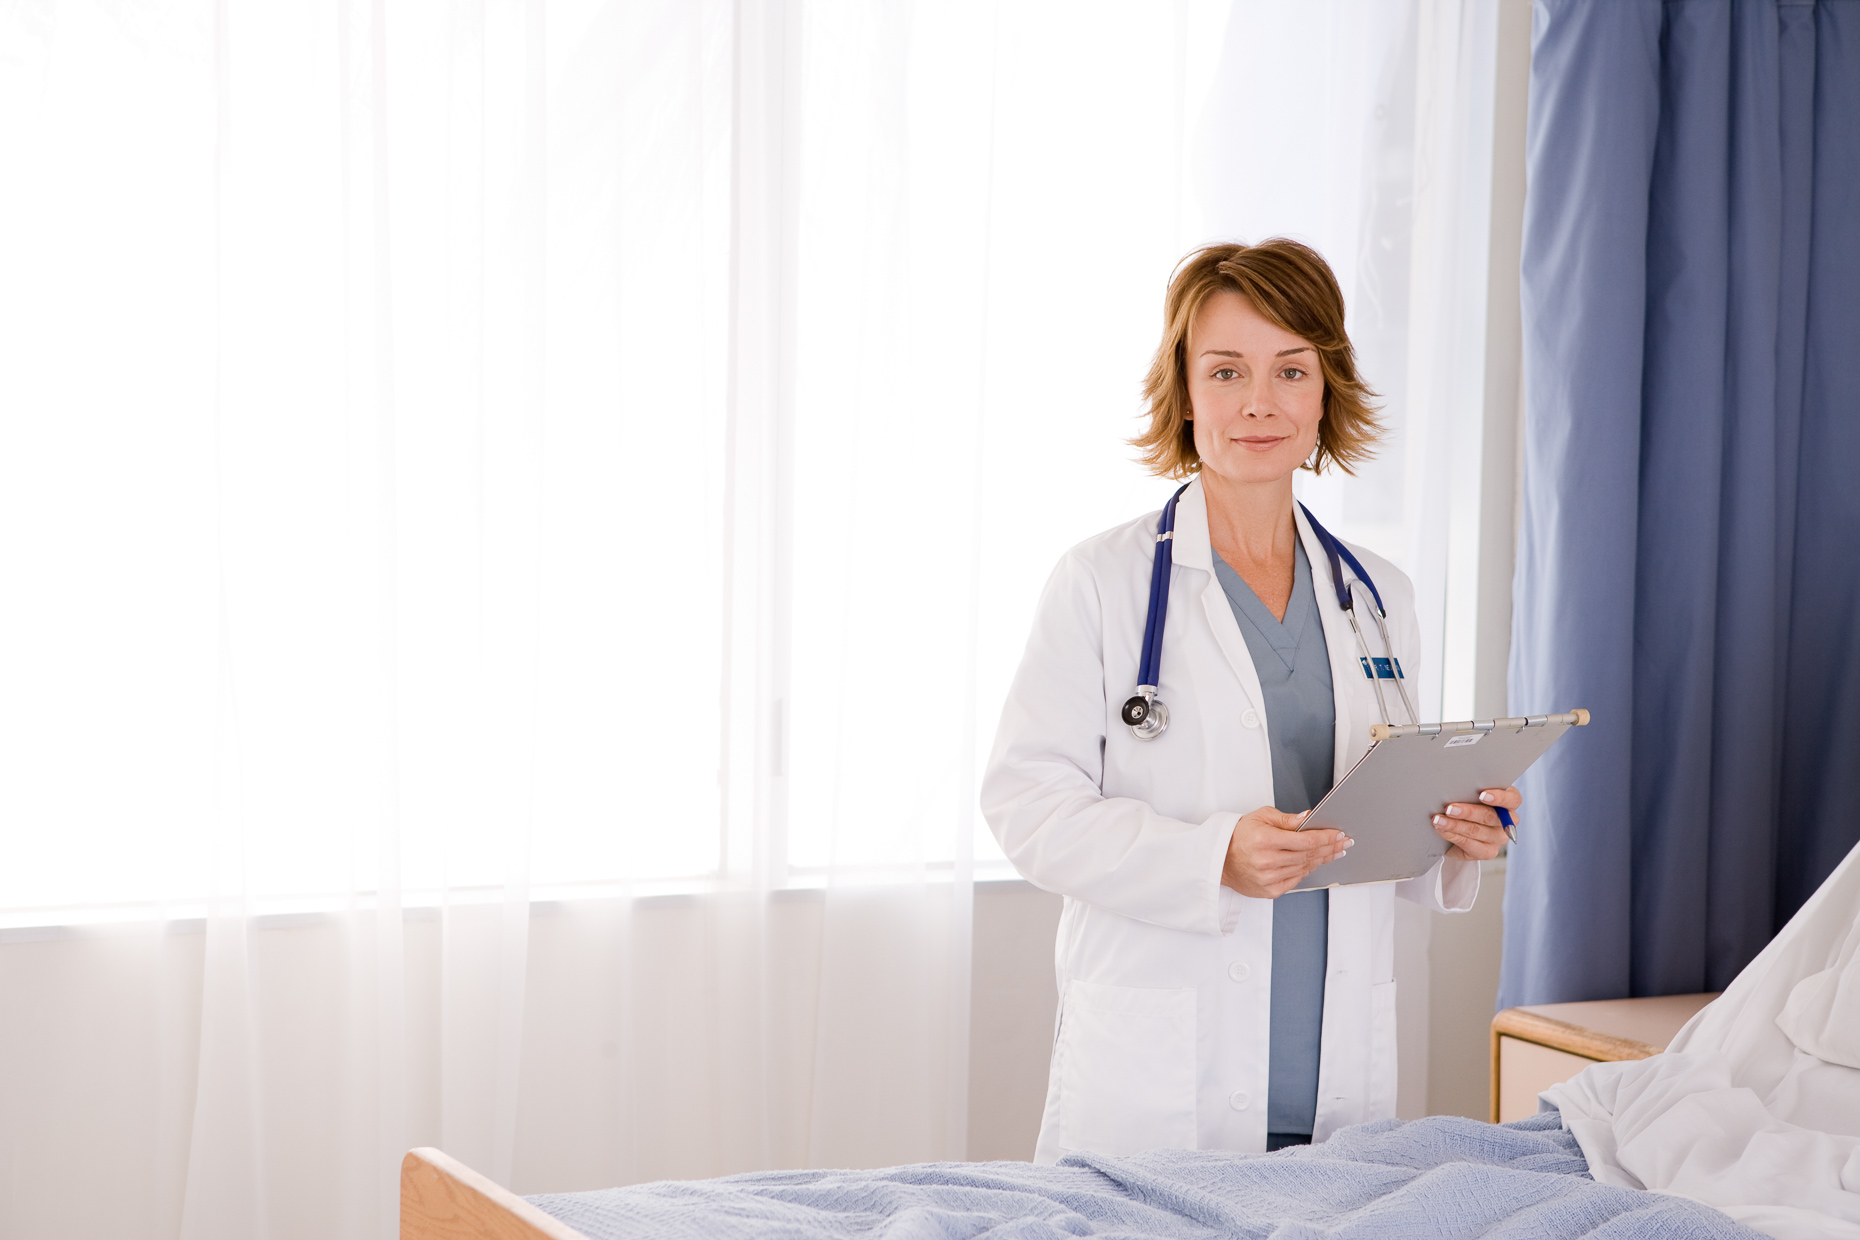 Portrait of medical doctor with clipboard next to hospital bed. Medical, healthcare. David Zaitz Photography.